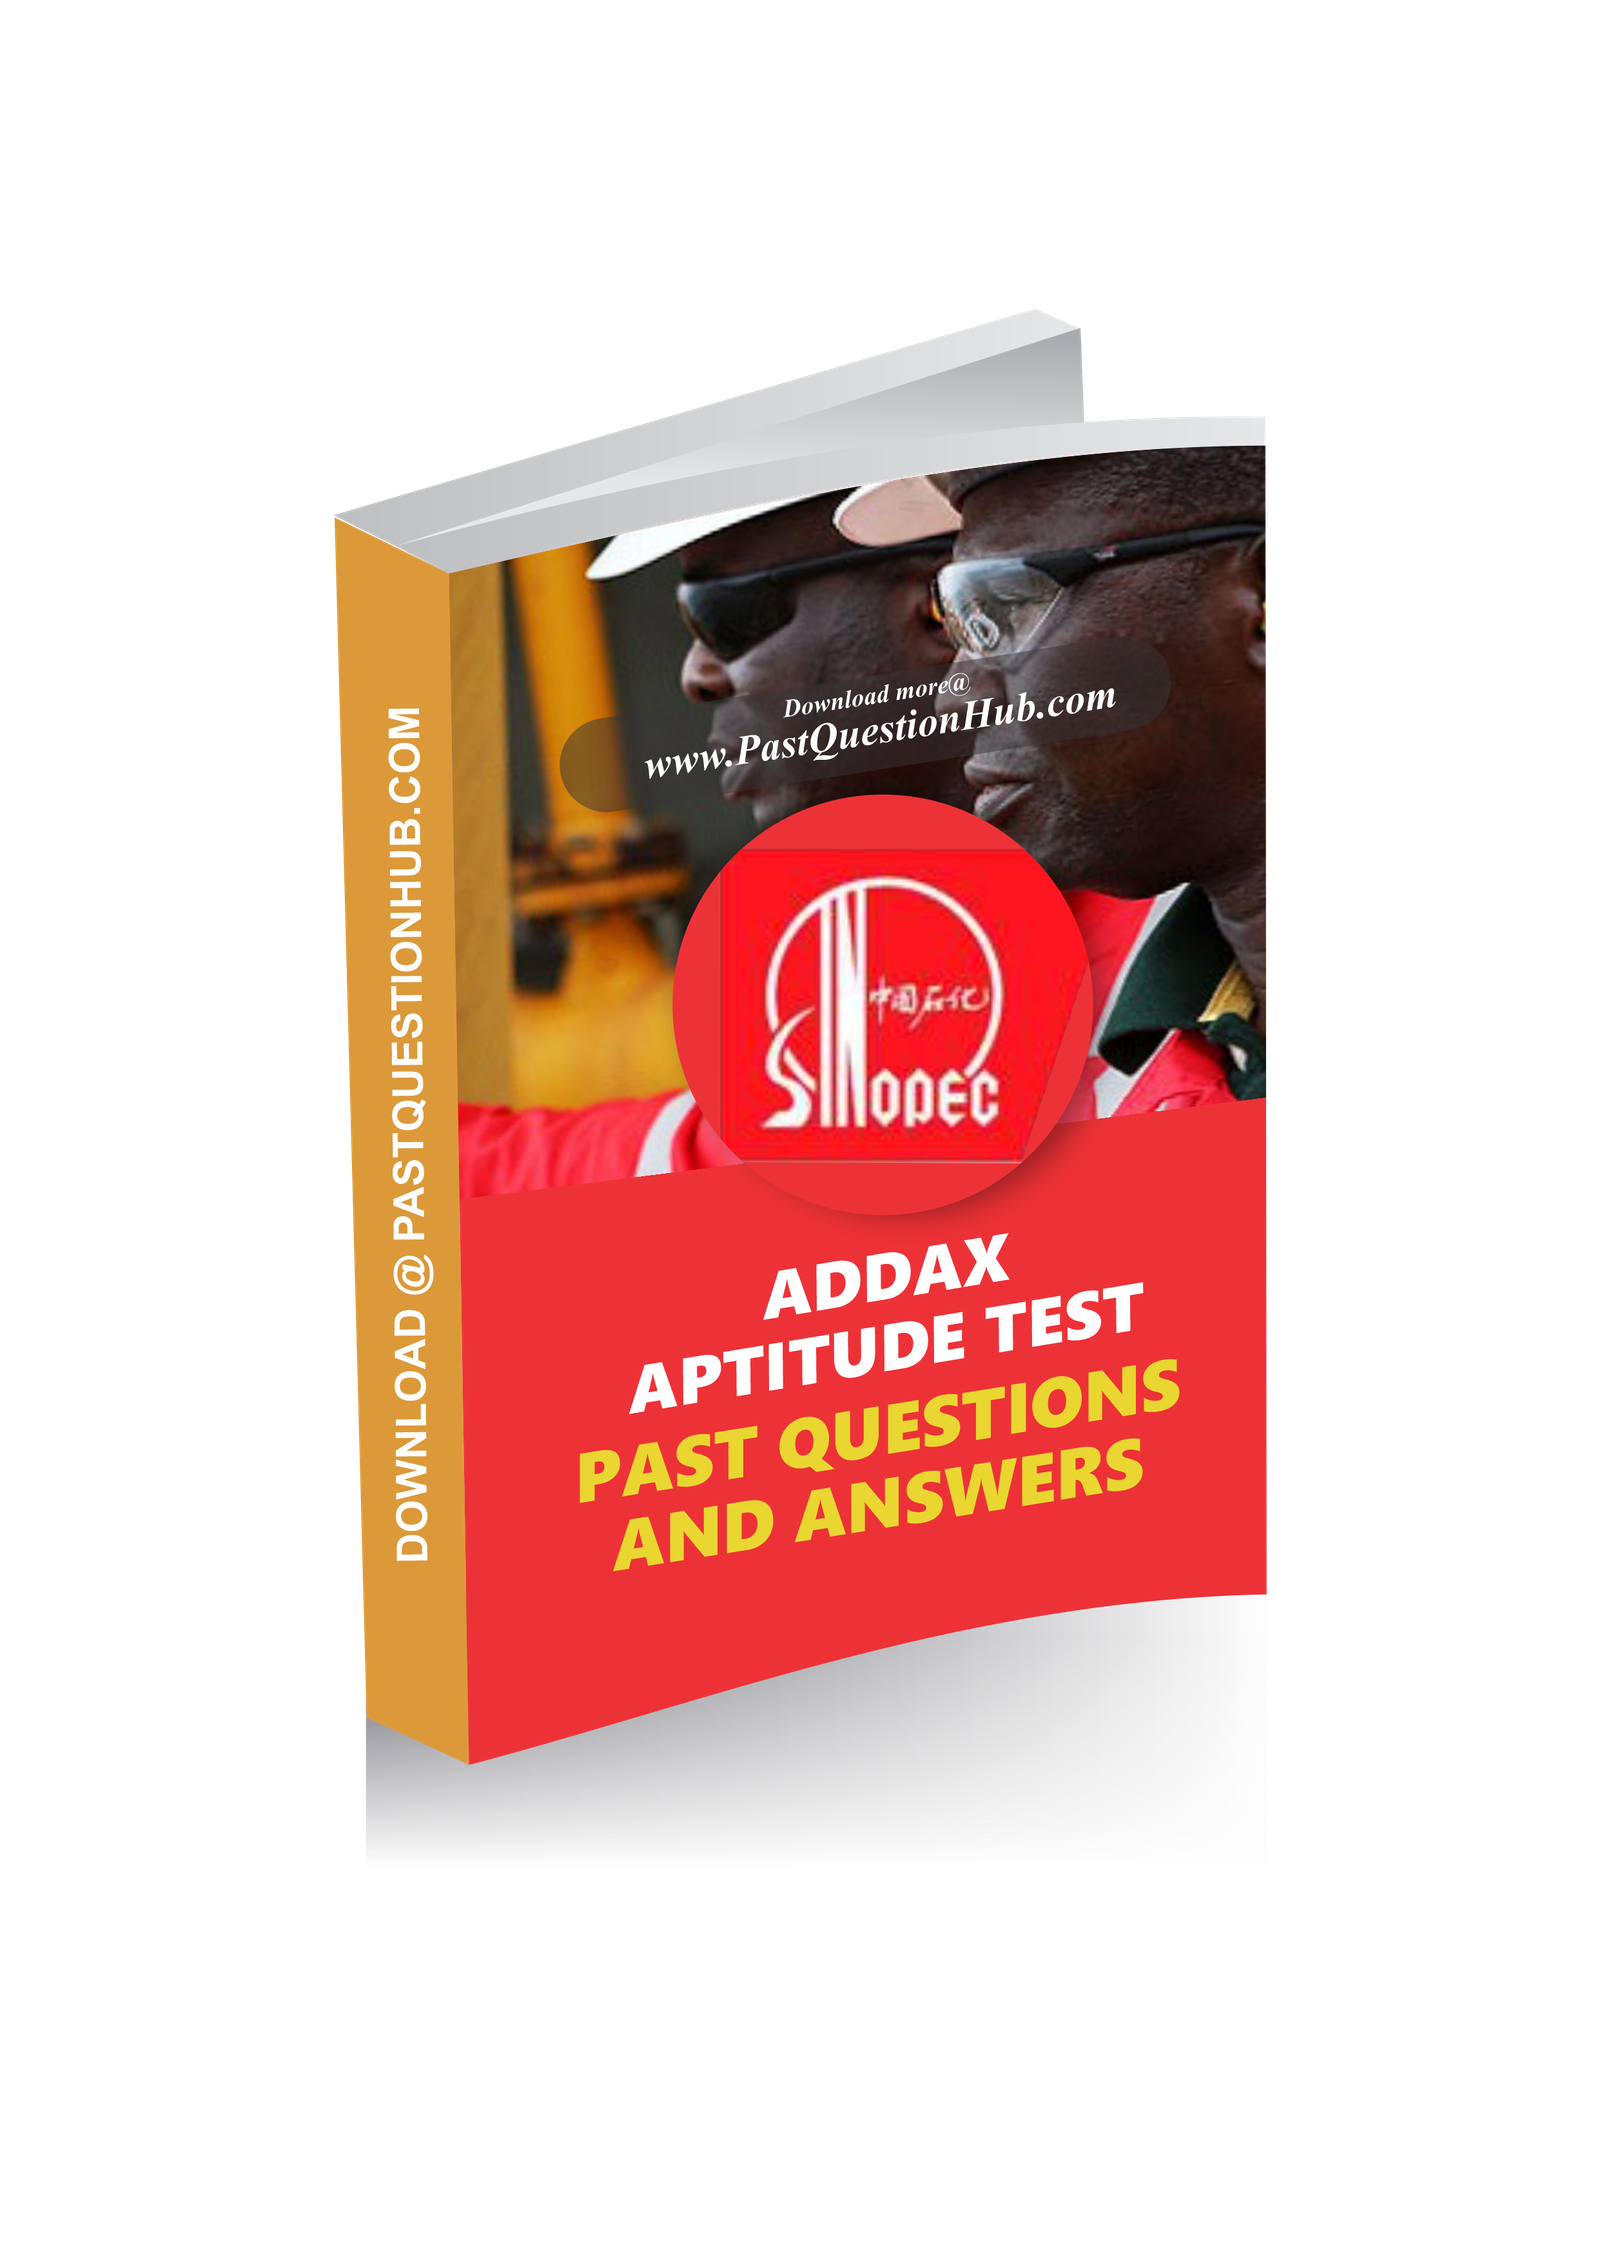 addax-aptitude-test-past-questions-and-answers-download-pdf-2021